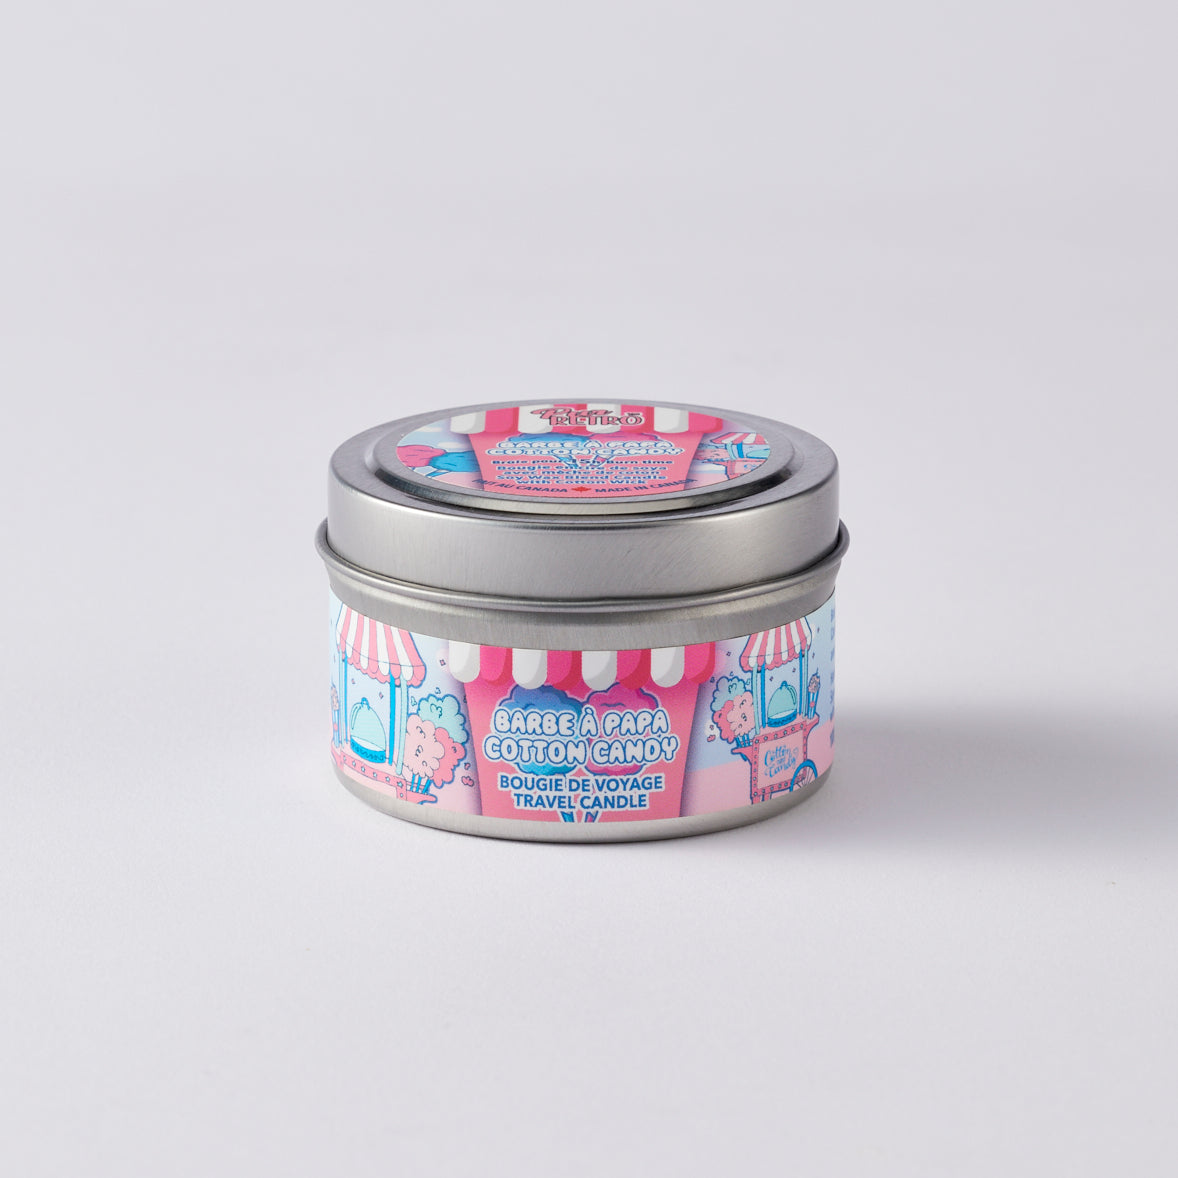 Pur Retro - Cotton Candy Candle